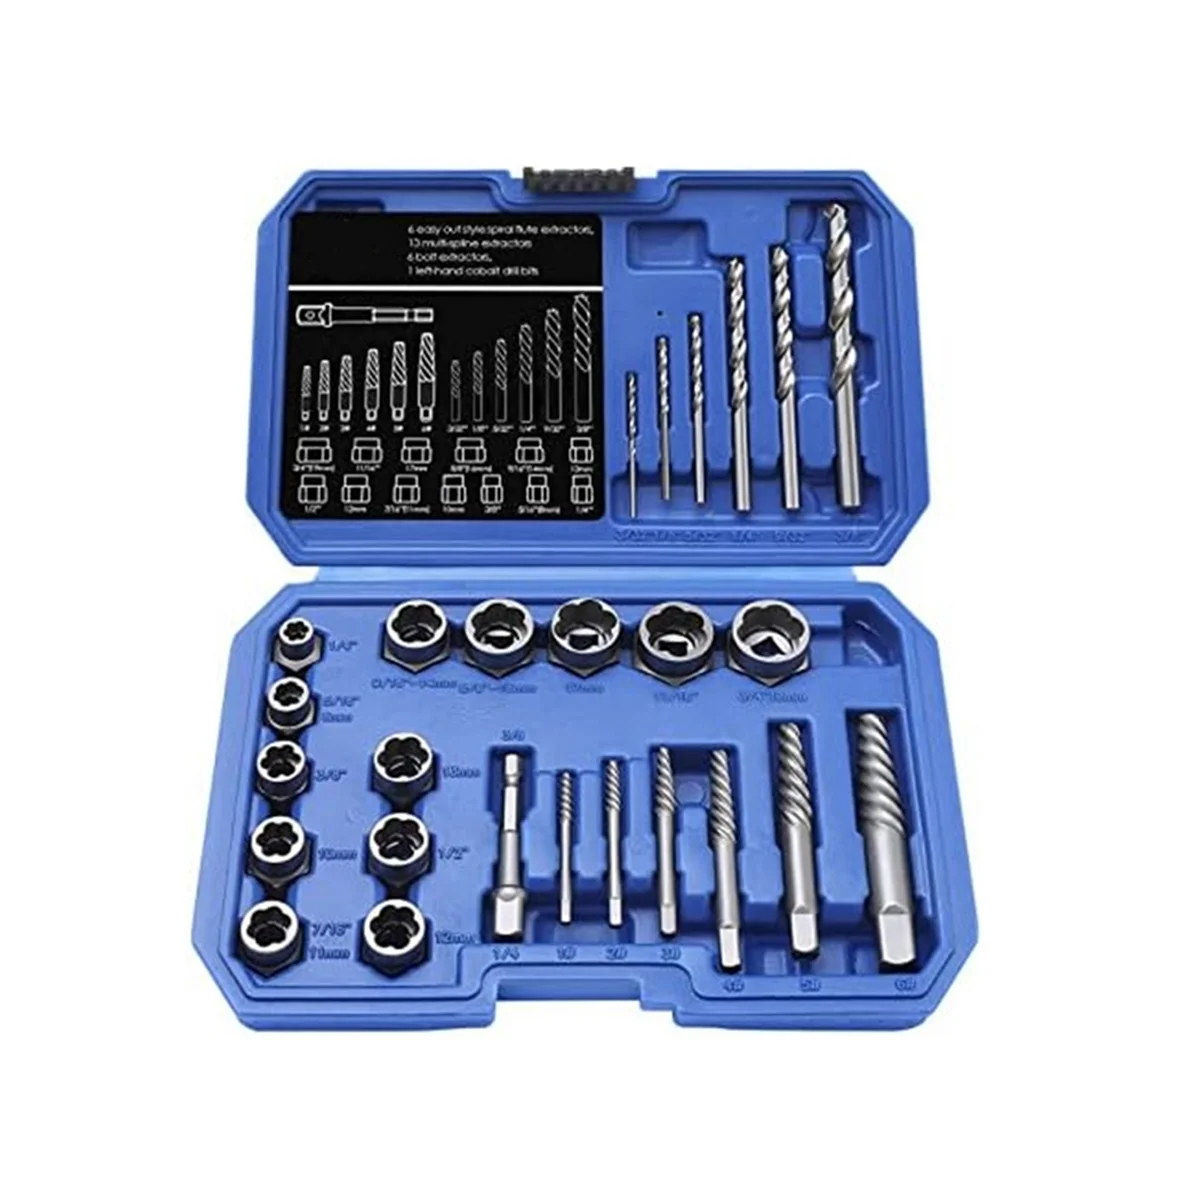 

Screws & Bolts Extractor Set Drill Bit with Hex Adapter, Out Broken Lug Nut Extractor Stripped Screw Remover Set